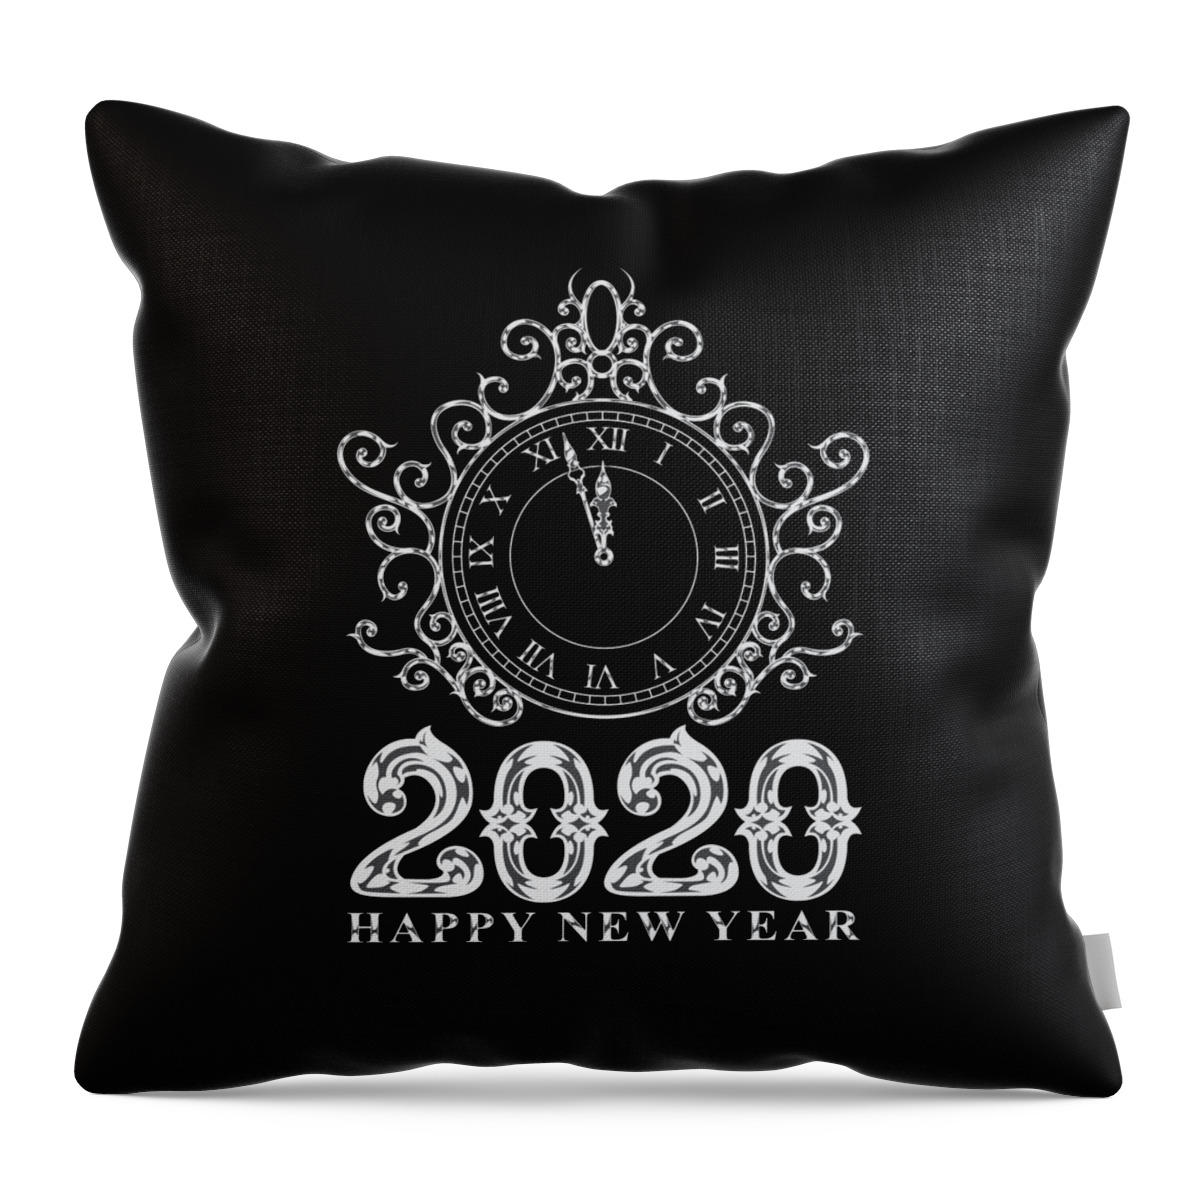 Happy New Year Throw Pillow featuring the digital art 2020 Happy New Year Clock is ticking by Mister Tee